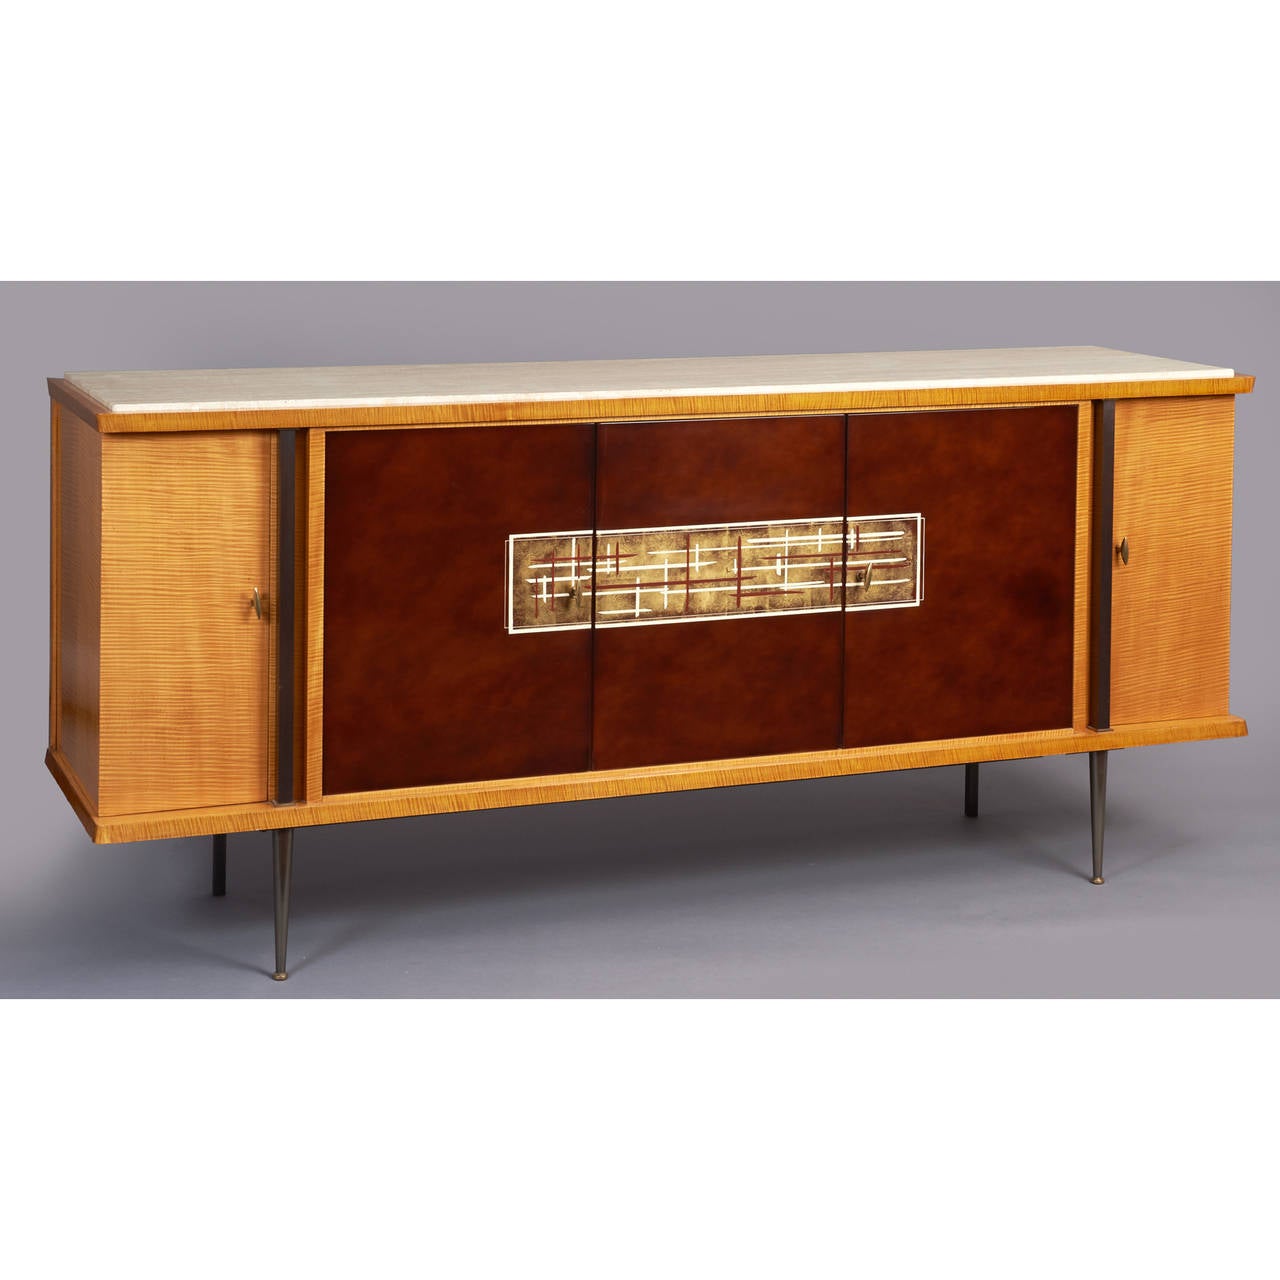 BATISTIN SPADE ( 1891-1969 )
A magnificent cabinet with three lacque nuage panel doors, 
unified by a gold leaf and enamel decorative abstract motif.
Blonde satin grained veneers, oxidized metal legs and pilastres,
travertine top.  Beautifully